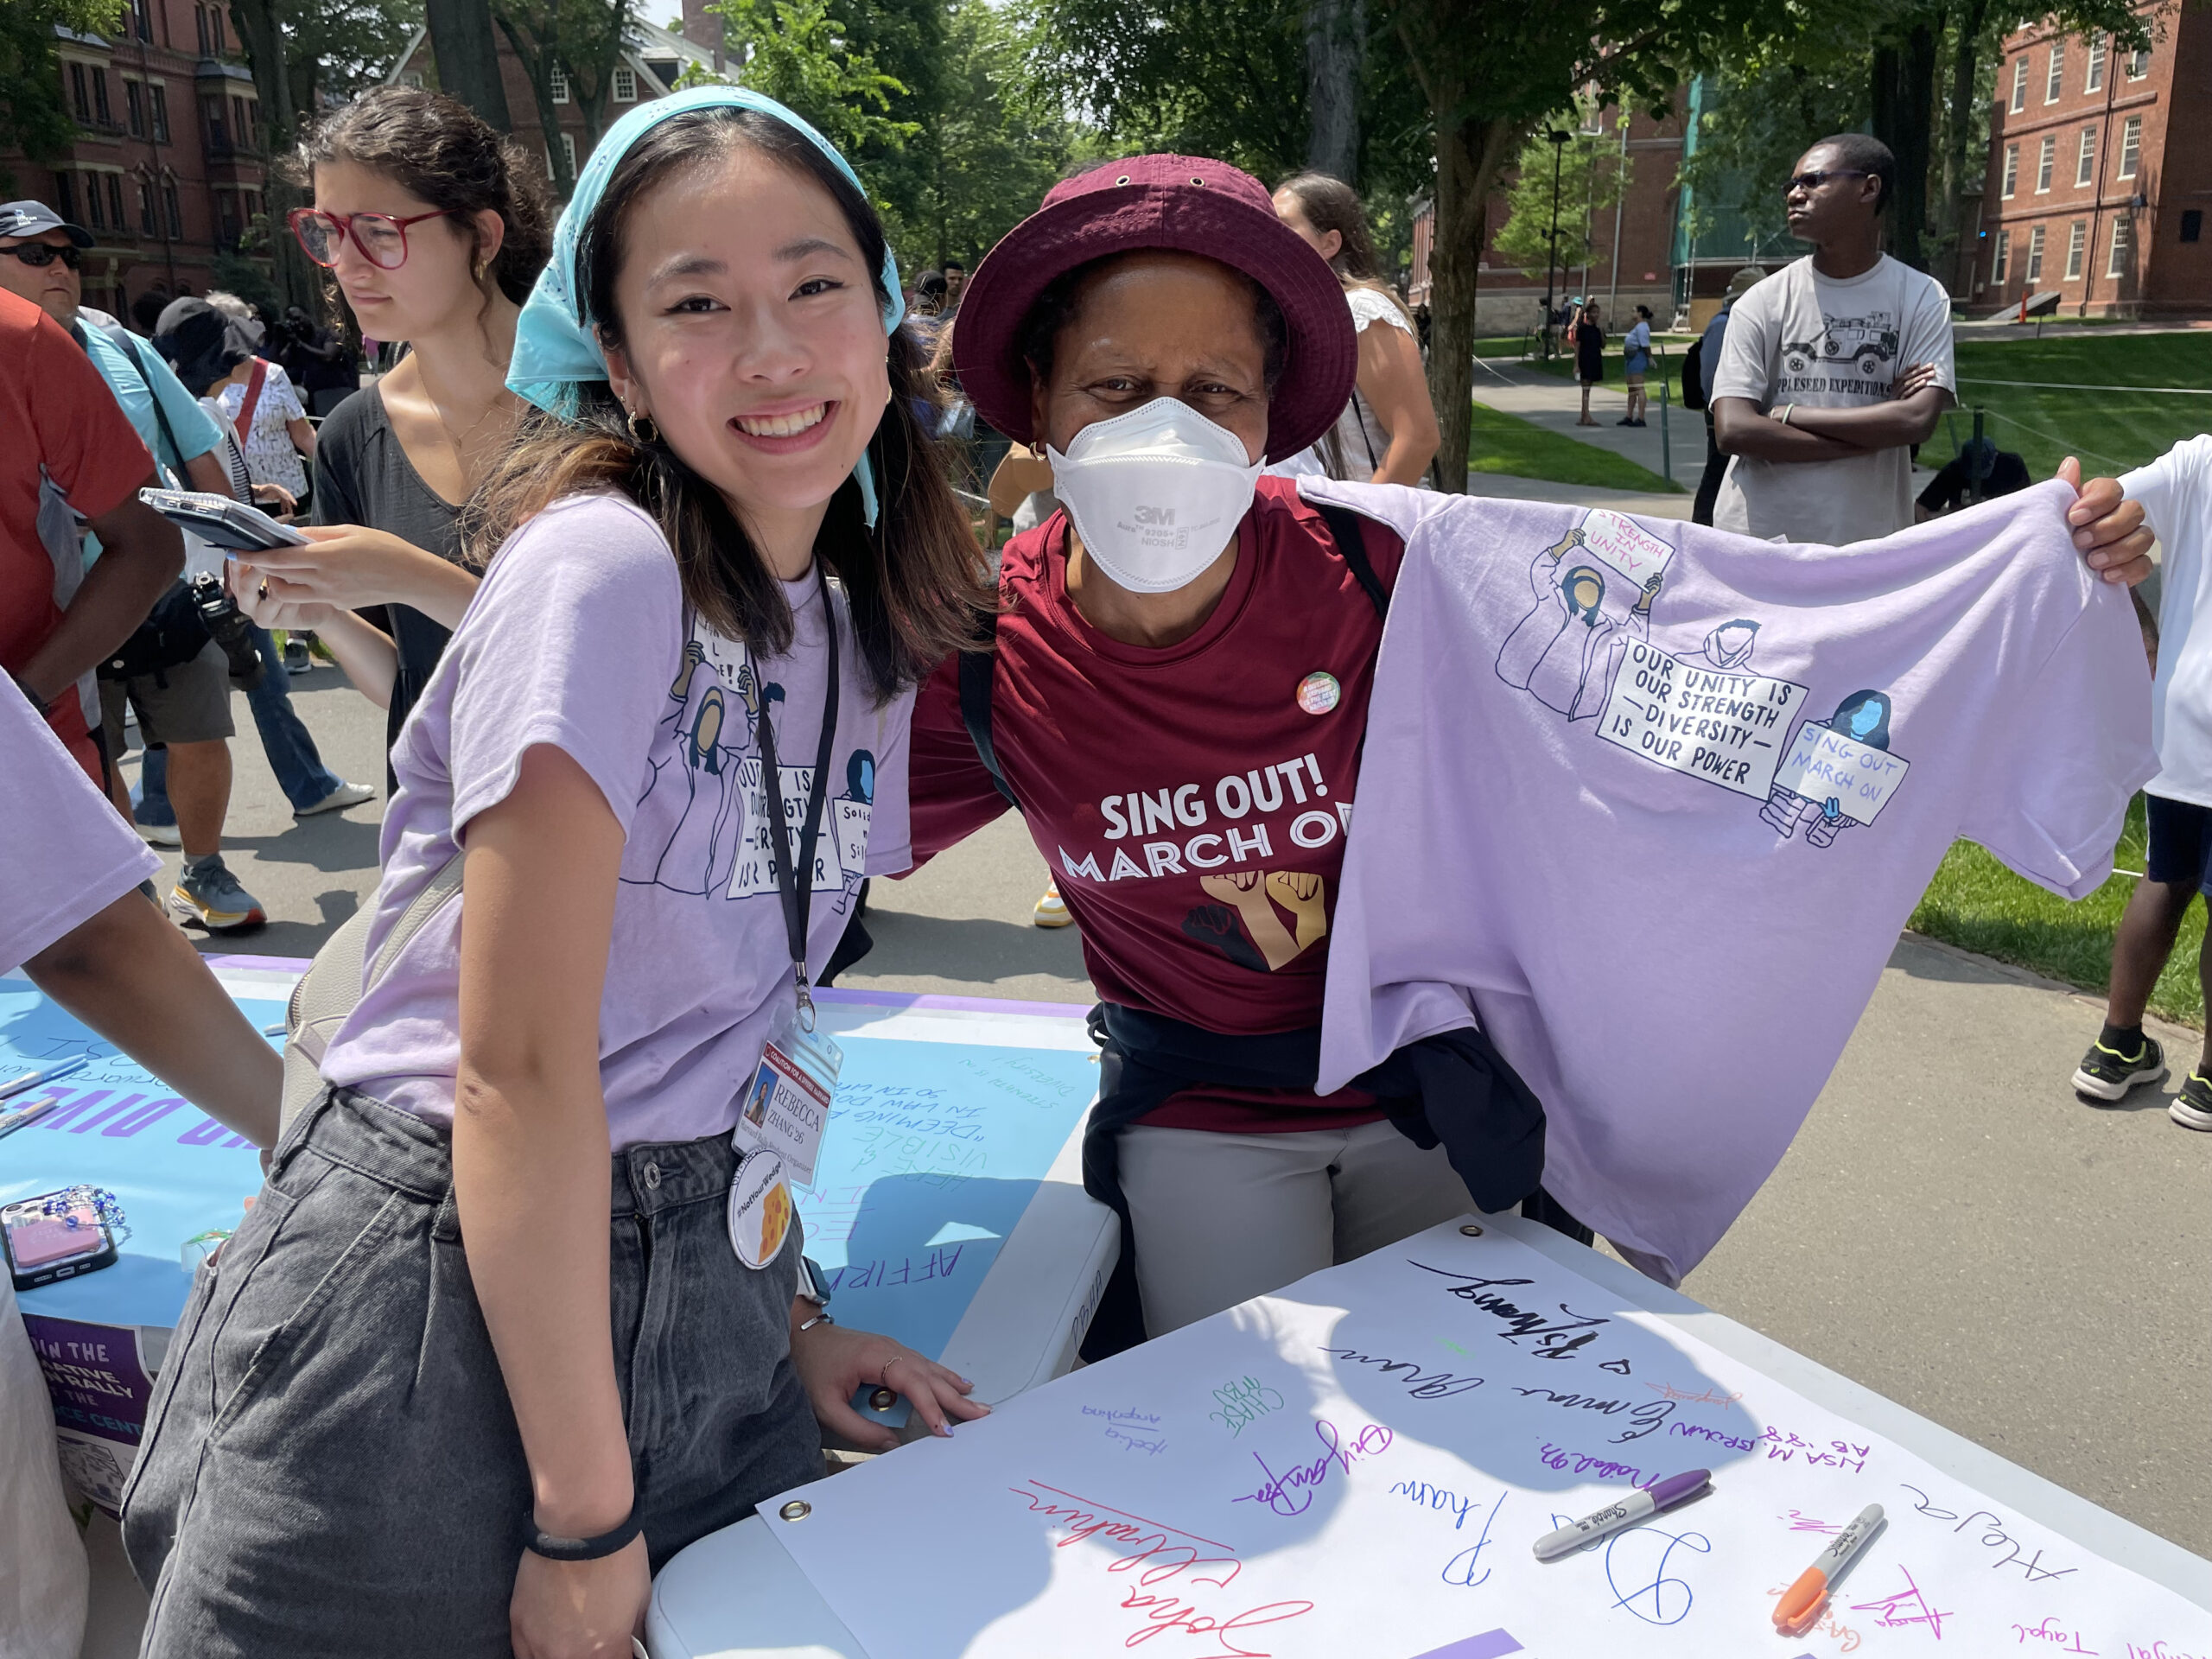 A student in a purple T-shirt poses with an alum in a red shirt behind a table with markers on top.